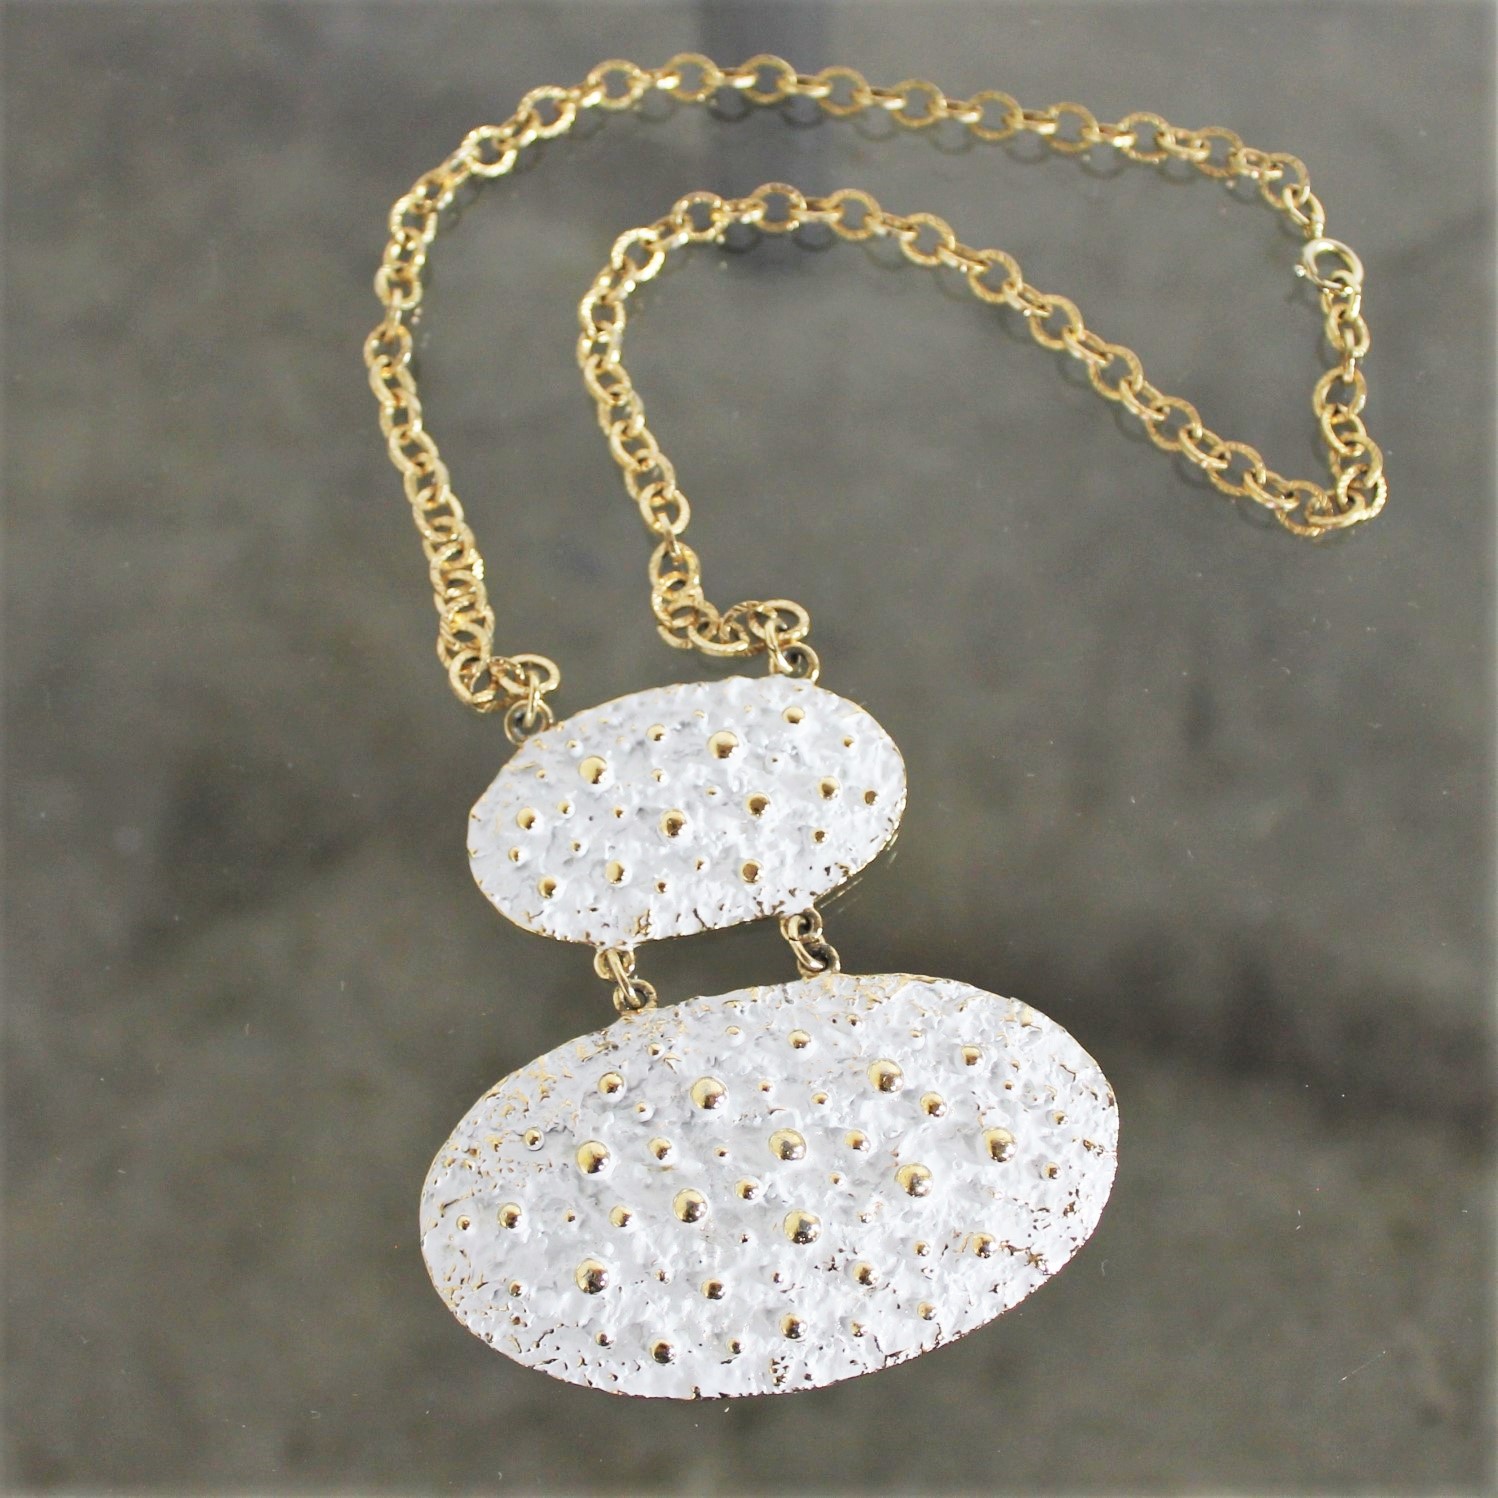 Vintage Napier Chunky Brutalist White Enamel and Gold-Tone Necklace